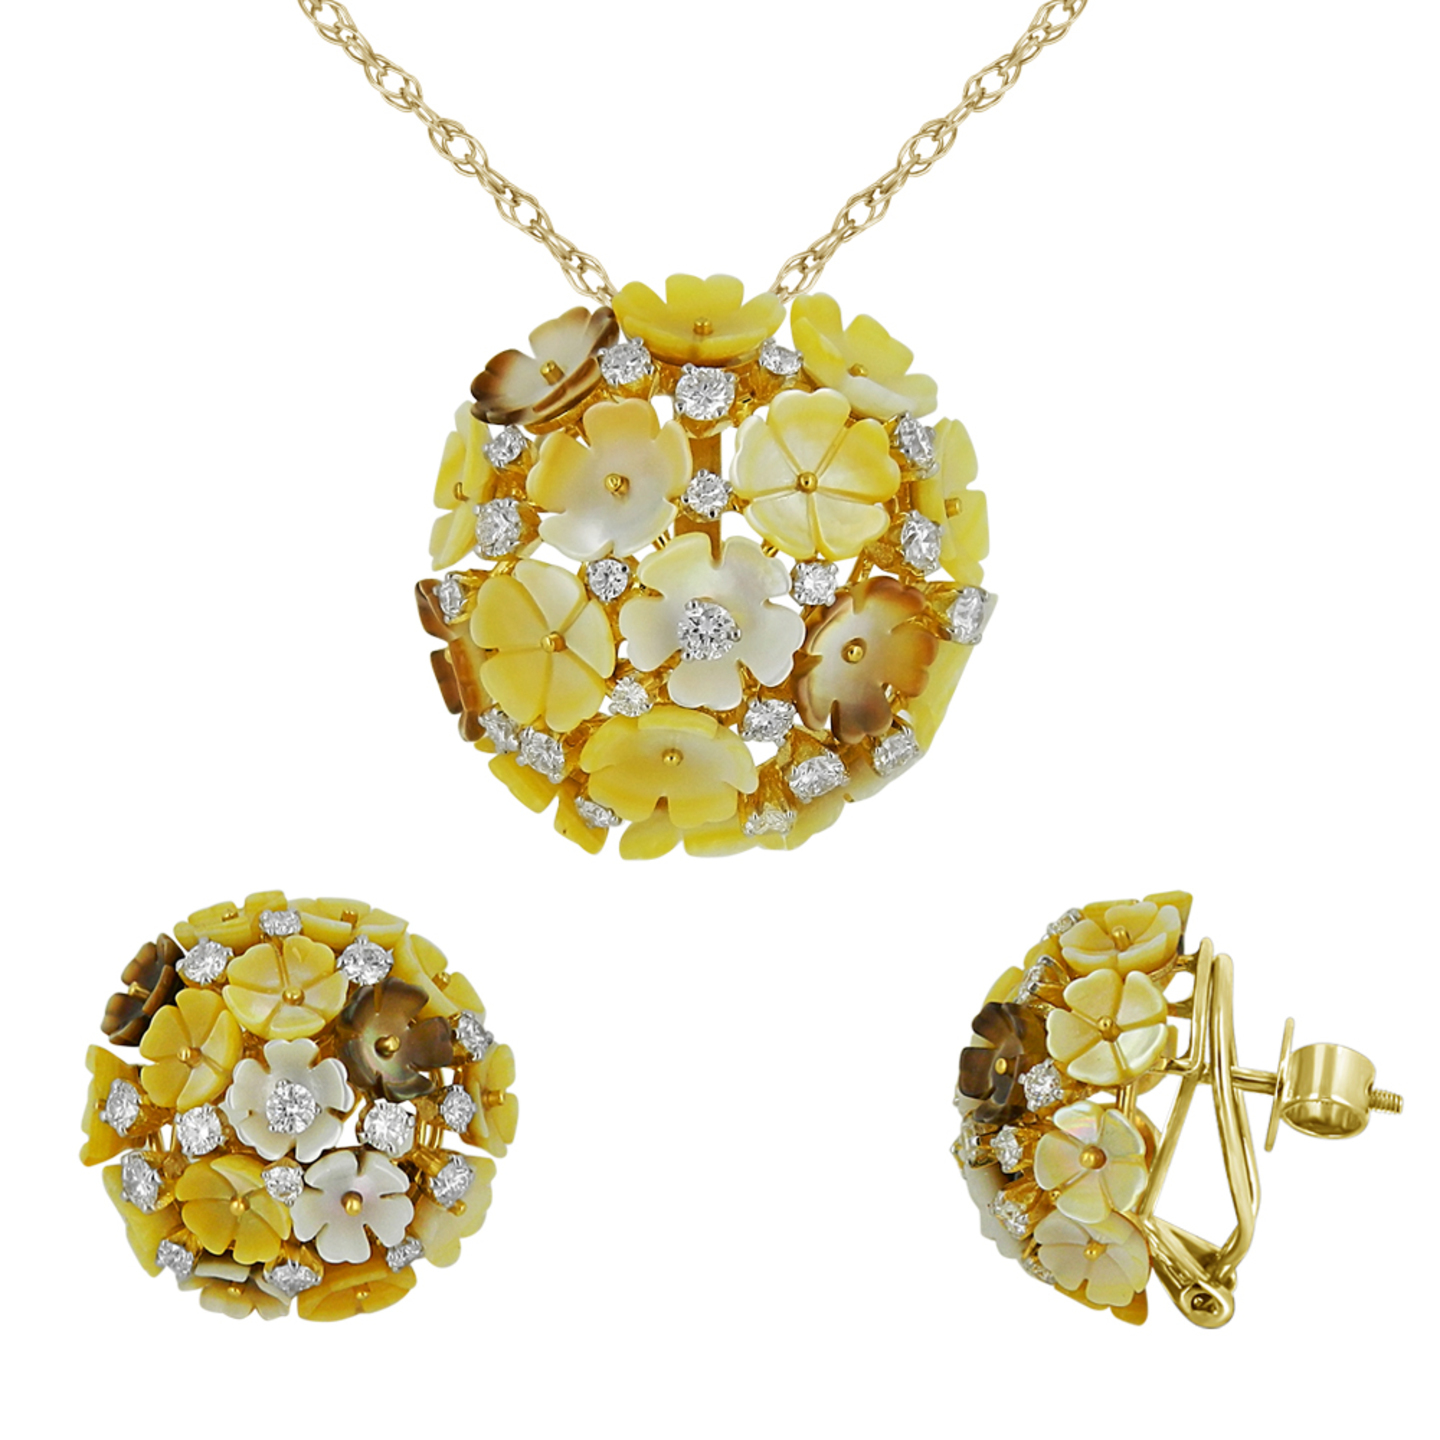 A pair of beautiful floral mother of pearl tops and matching pendant that doubles up as a cocktail ring